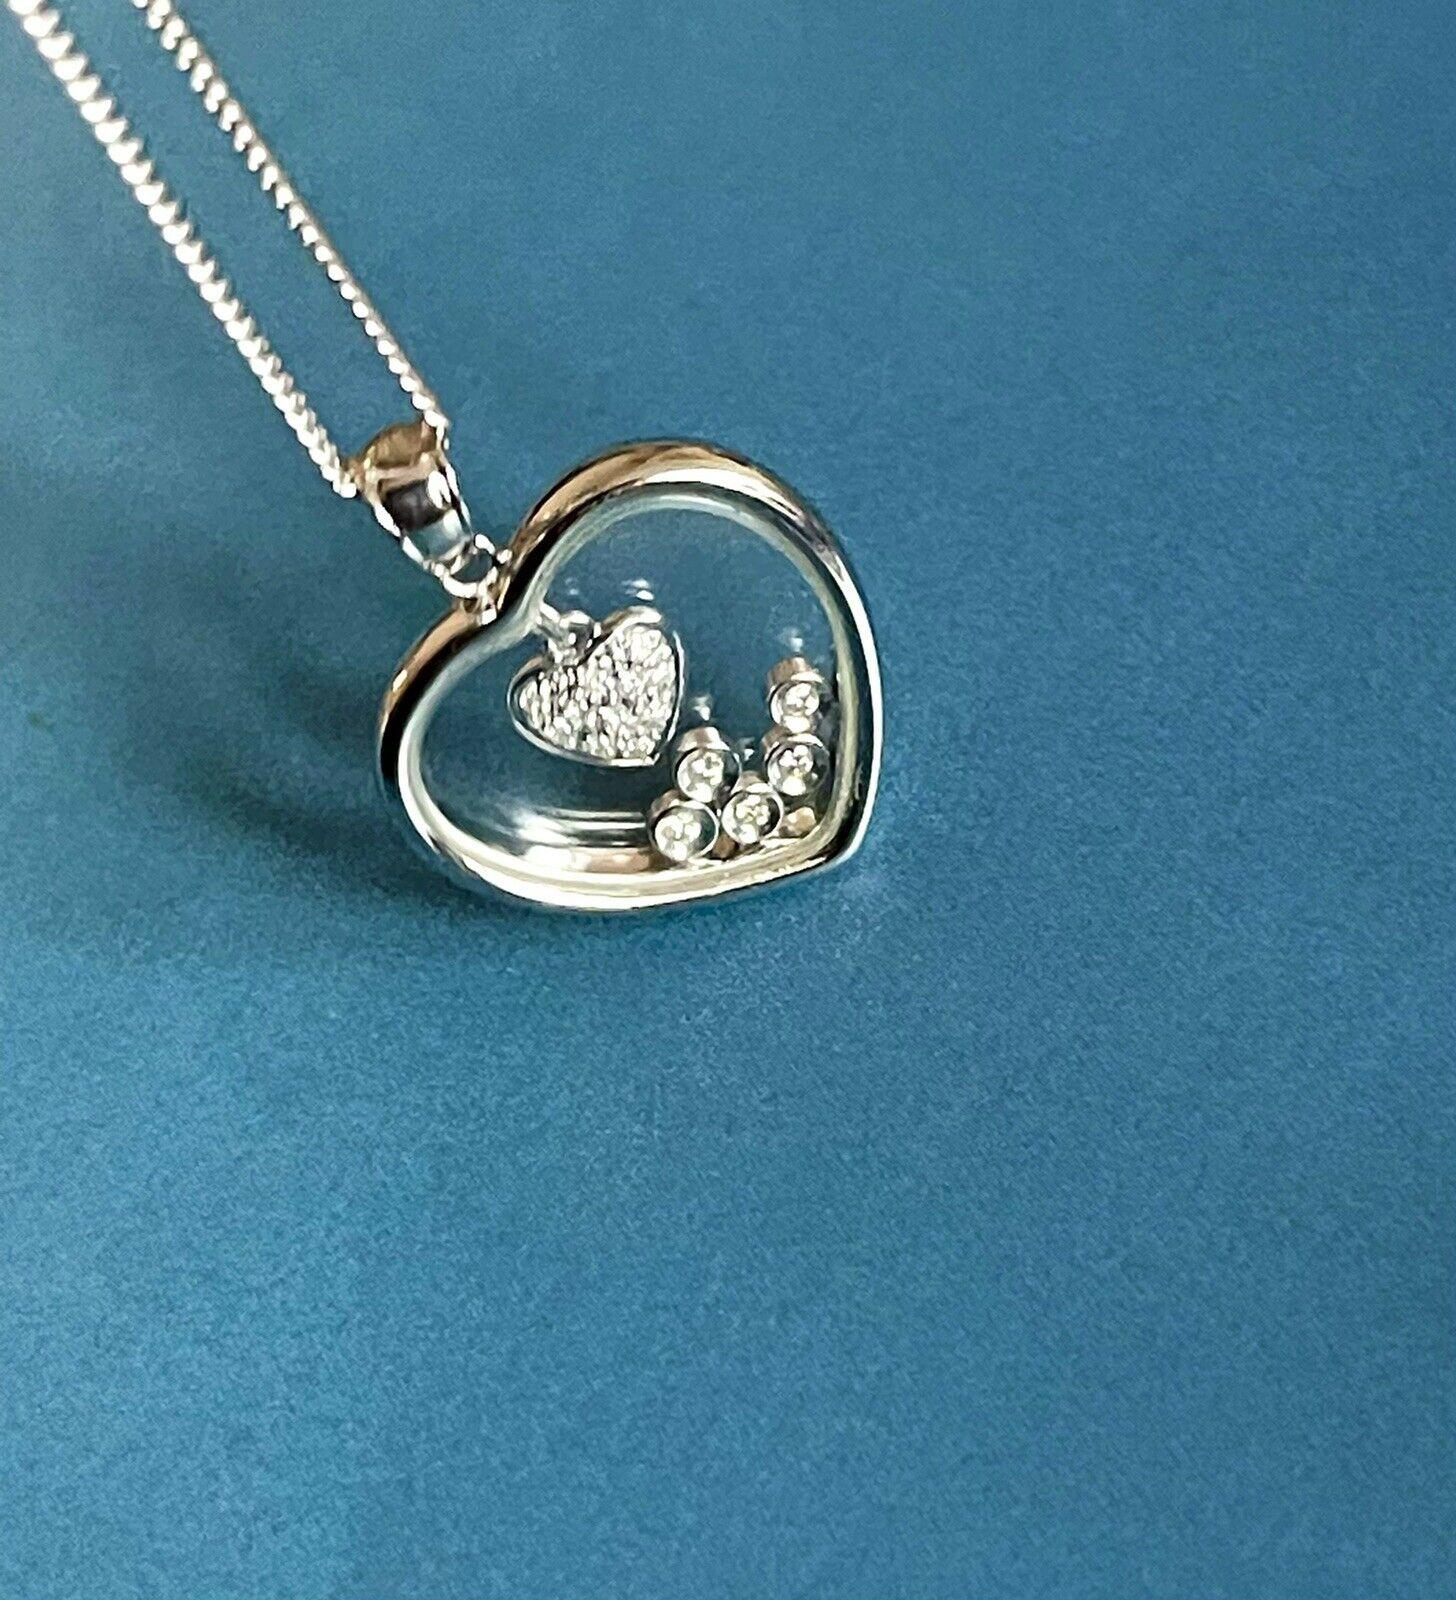 9ct White Gold Dancing Diamond Necklace 0.22ct Floating Diamond Heart Pendant Ch For Sale 2